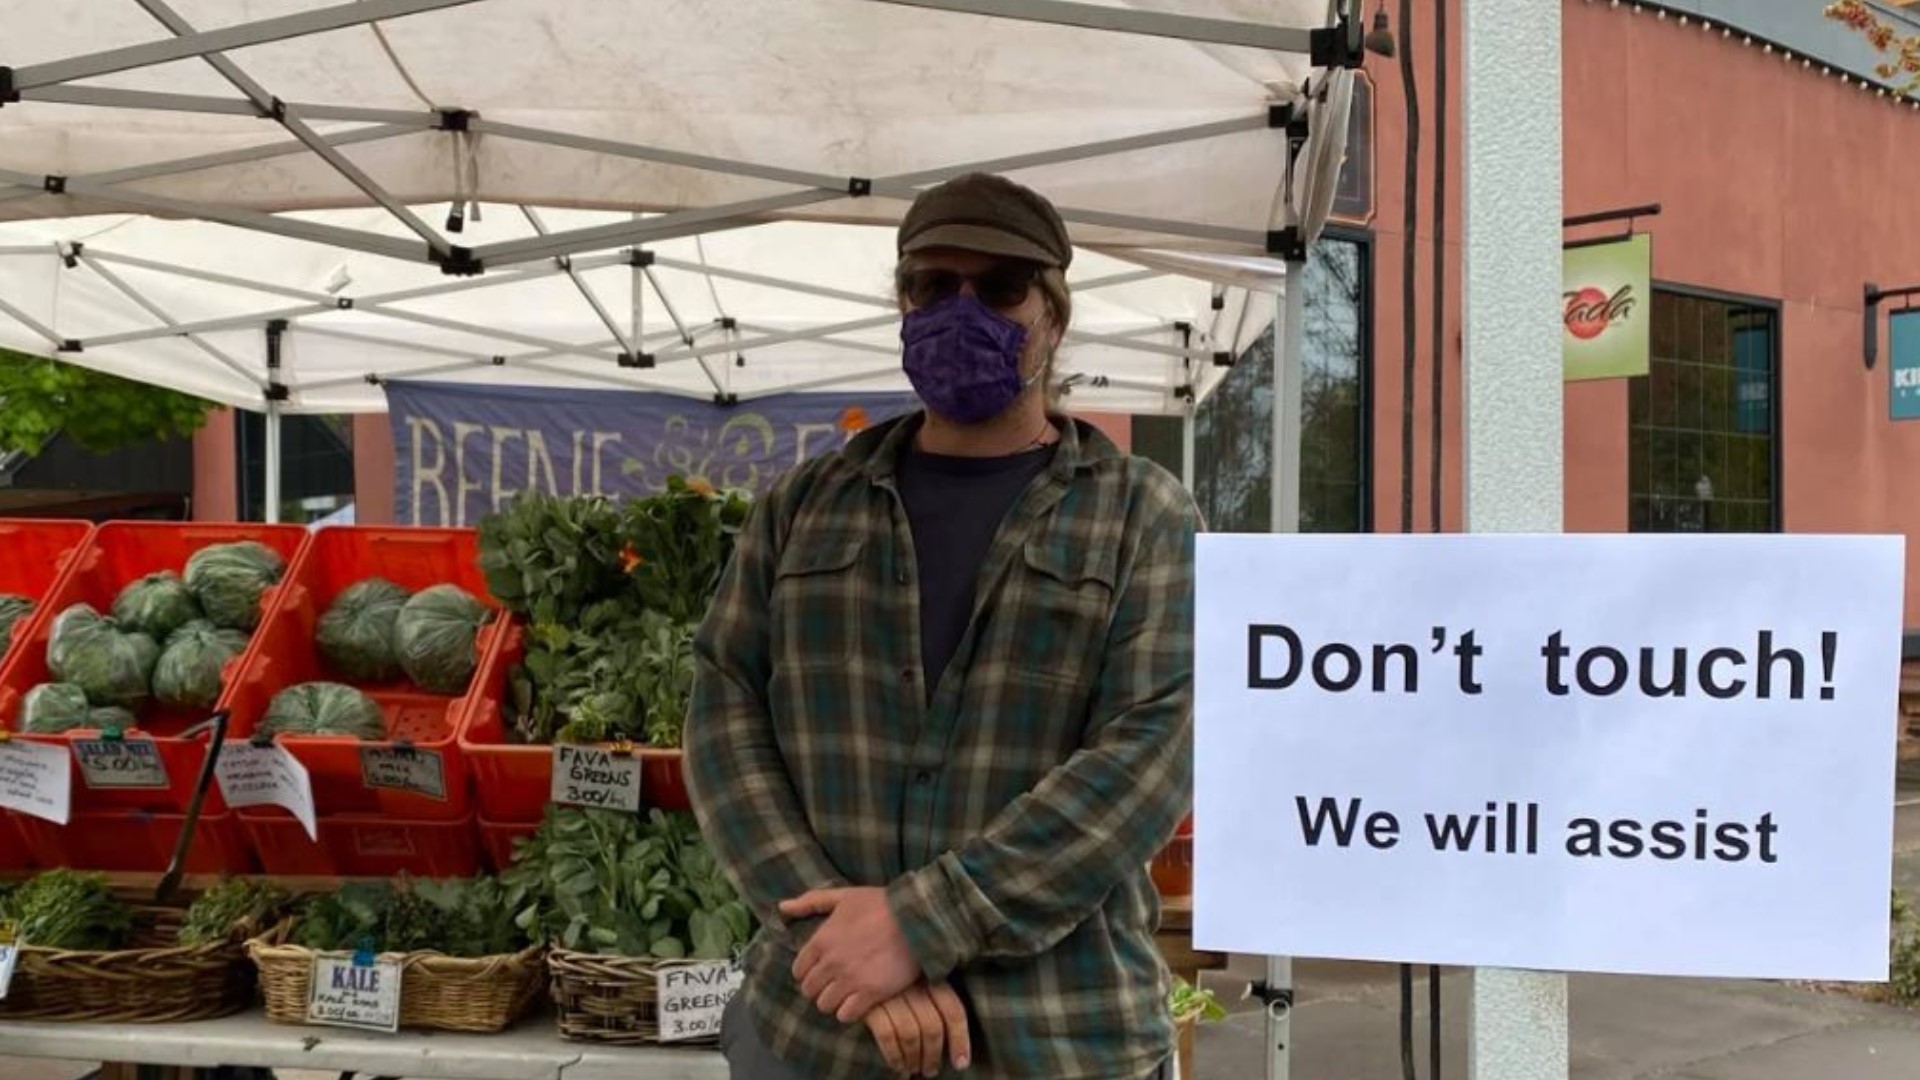 Do you love online shopping? Now you can shop for delicious local produce and other goods with the Oregon Online Farmers Markets.